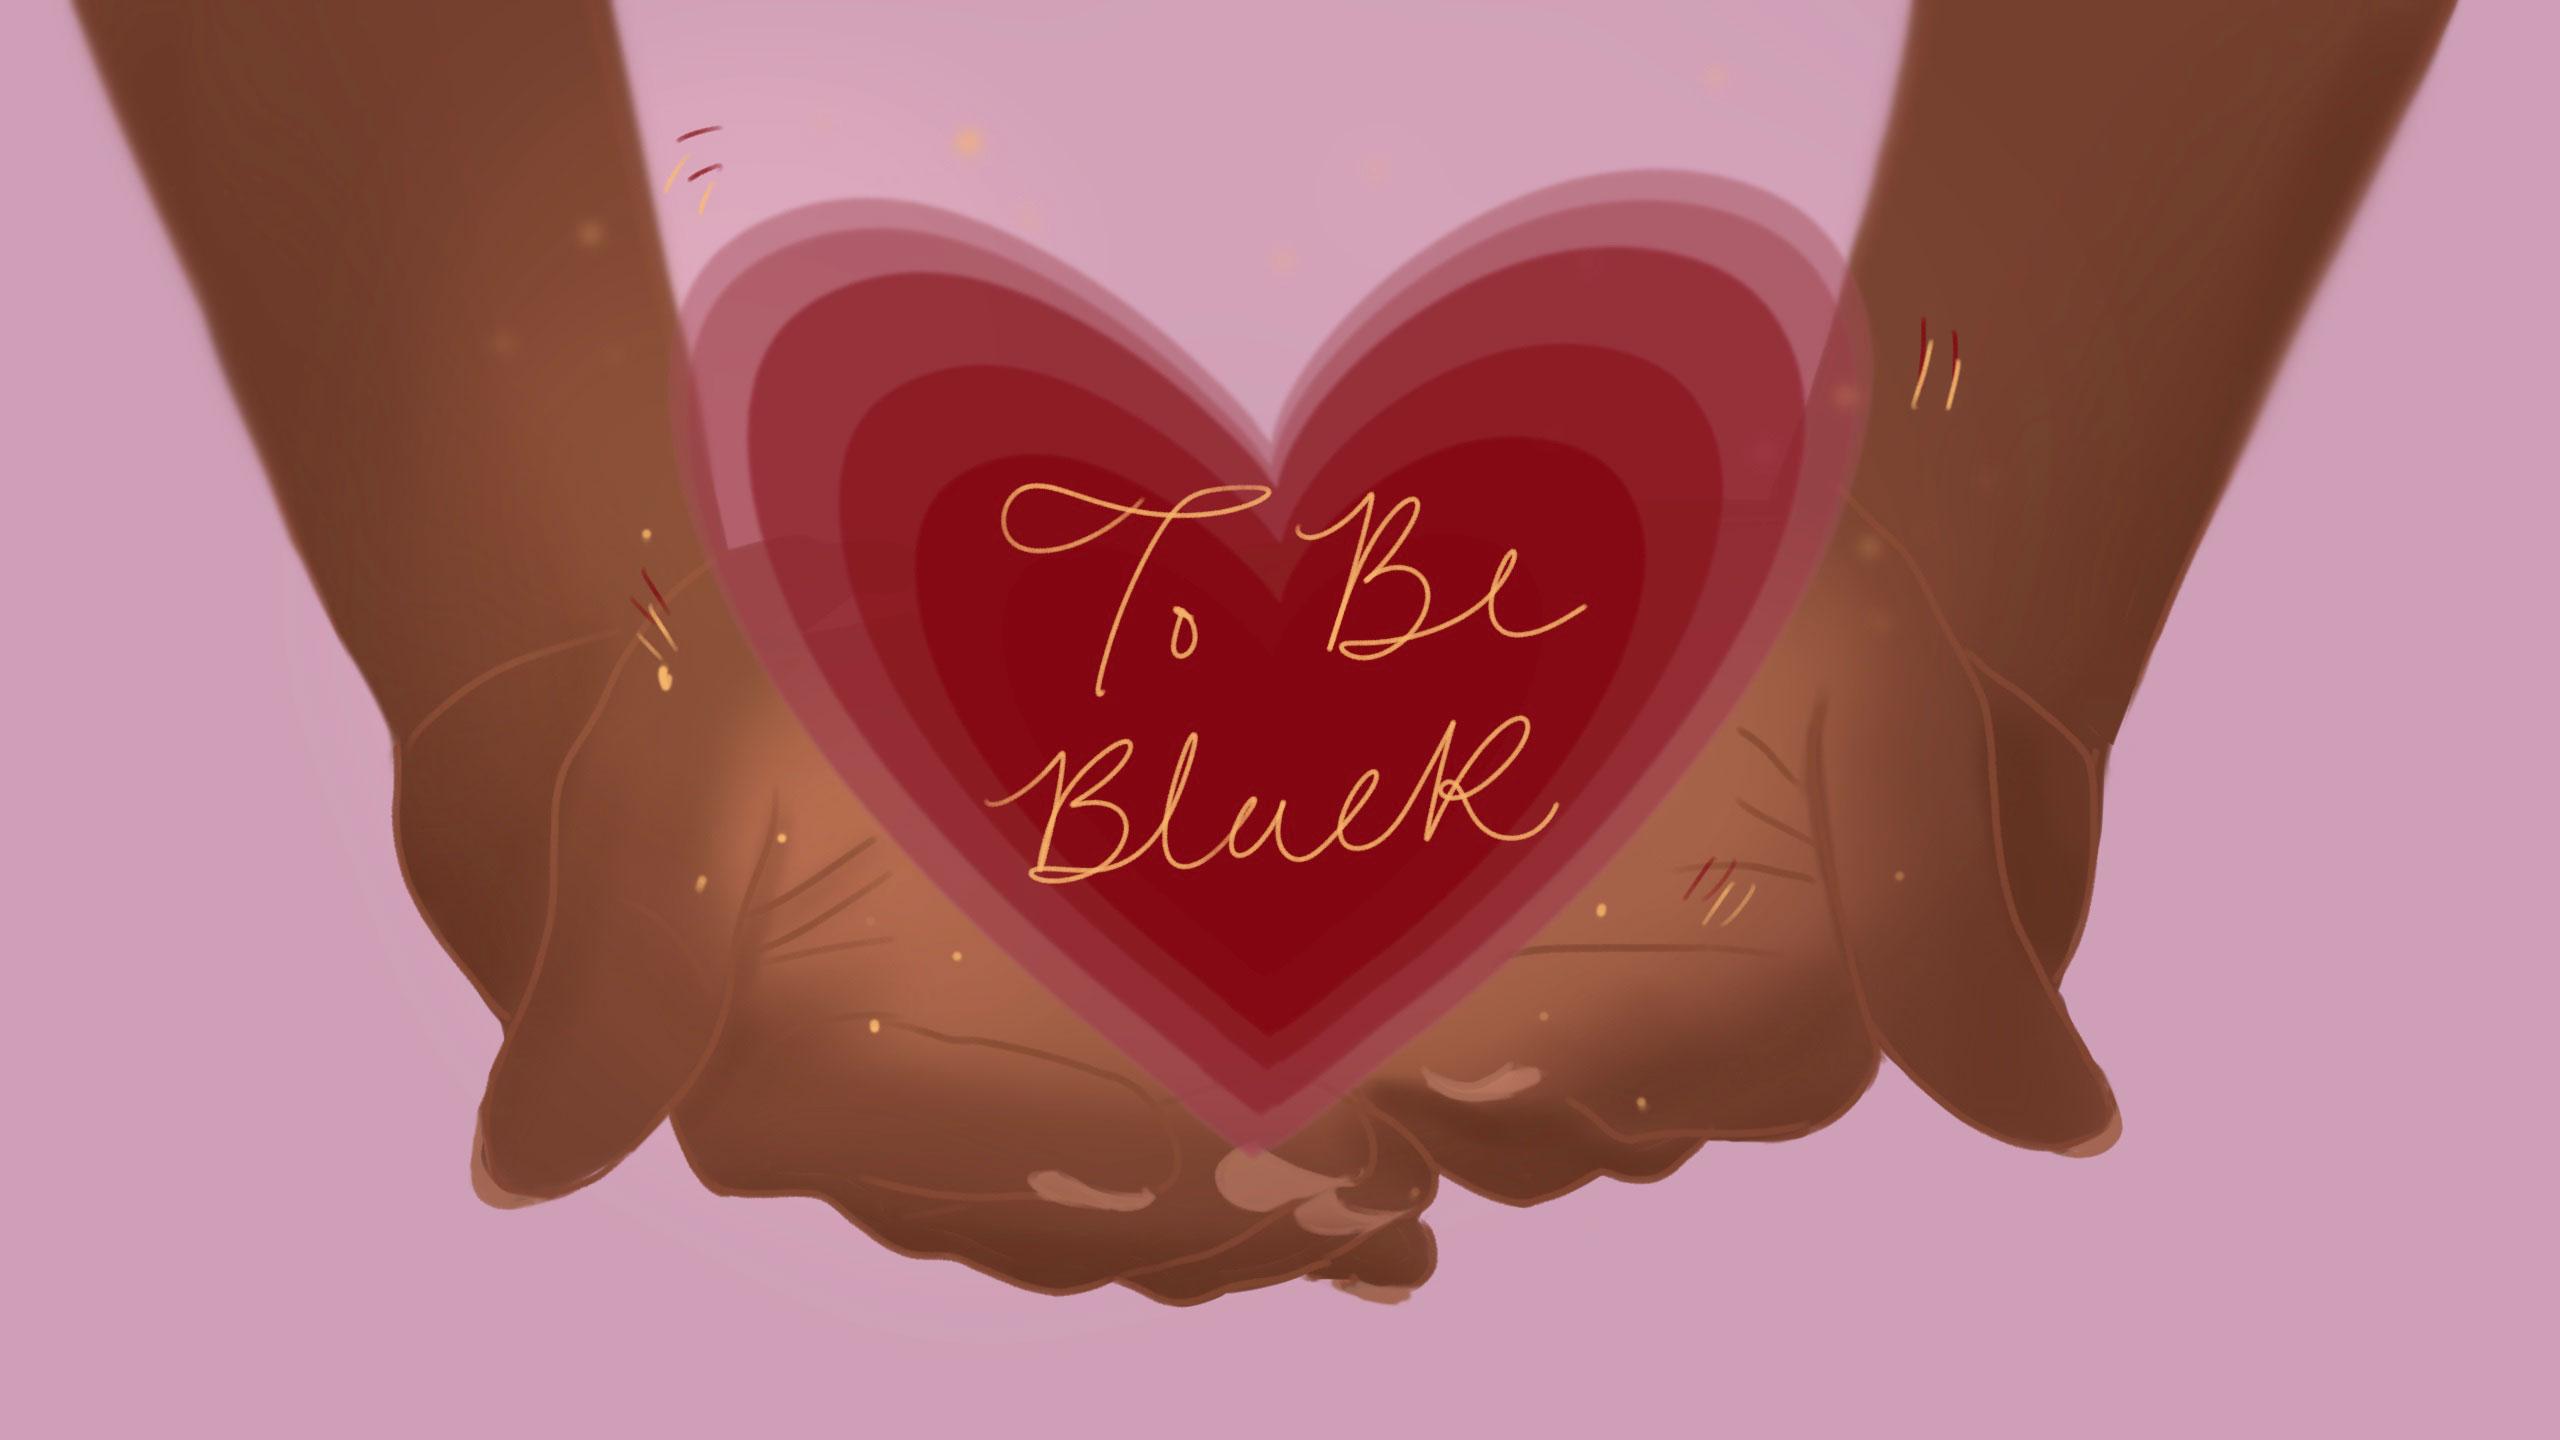 Hands hold up a glowing heart with "To Be Black" written on it in gold.